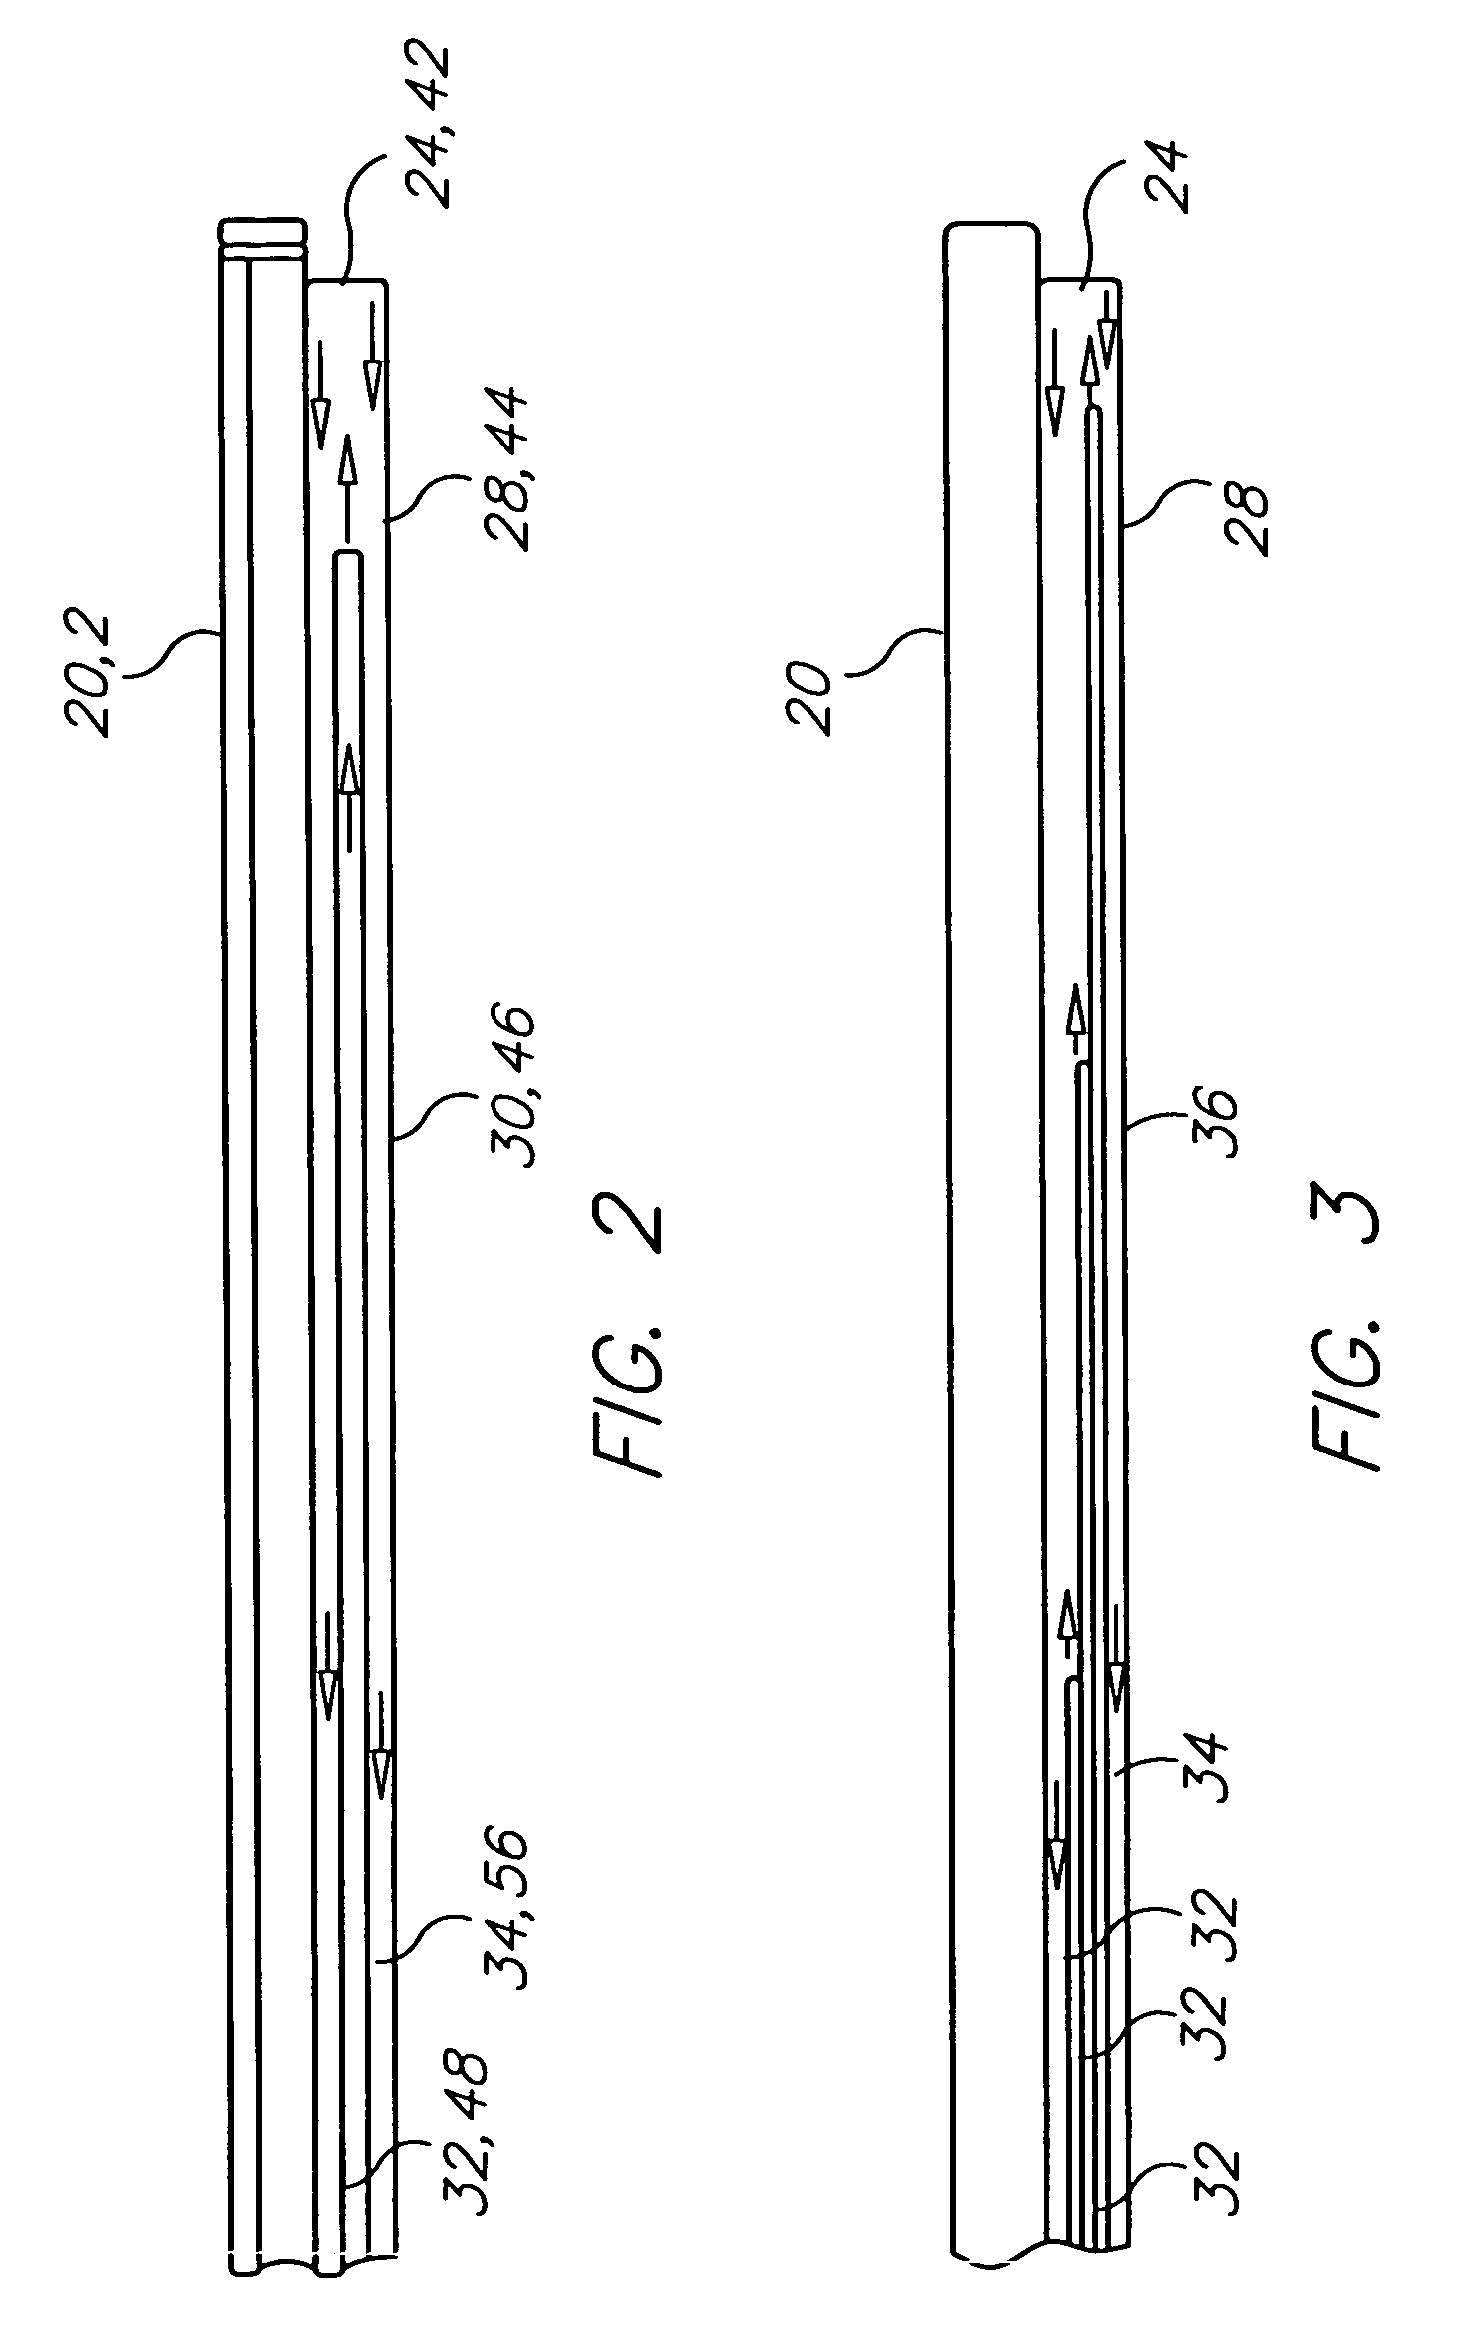 Surgical clamp having treatment elements